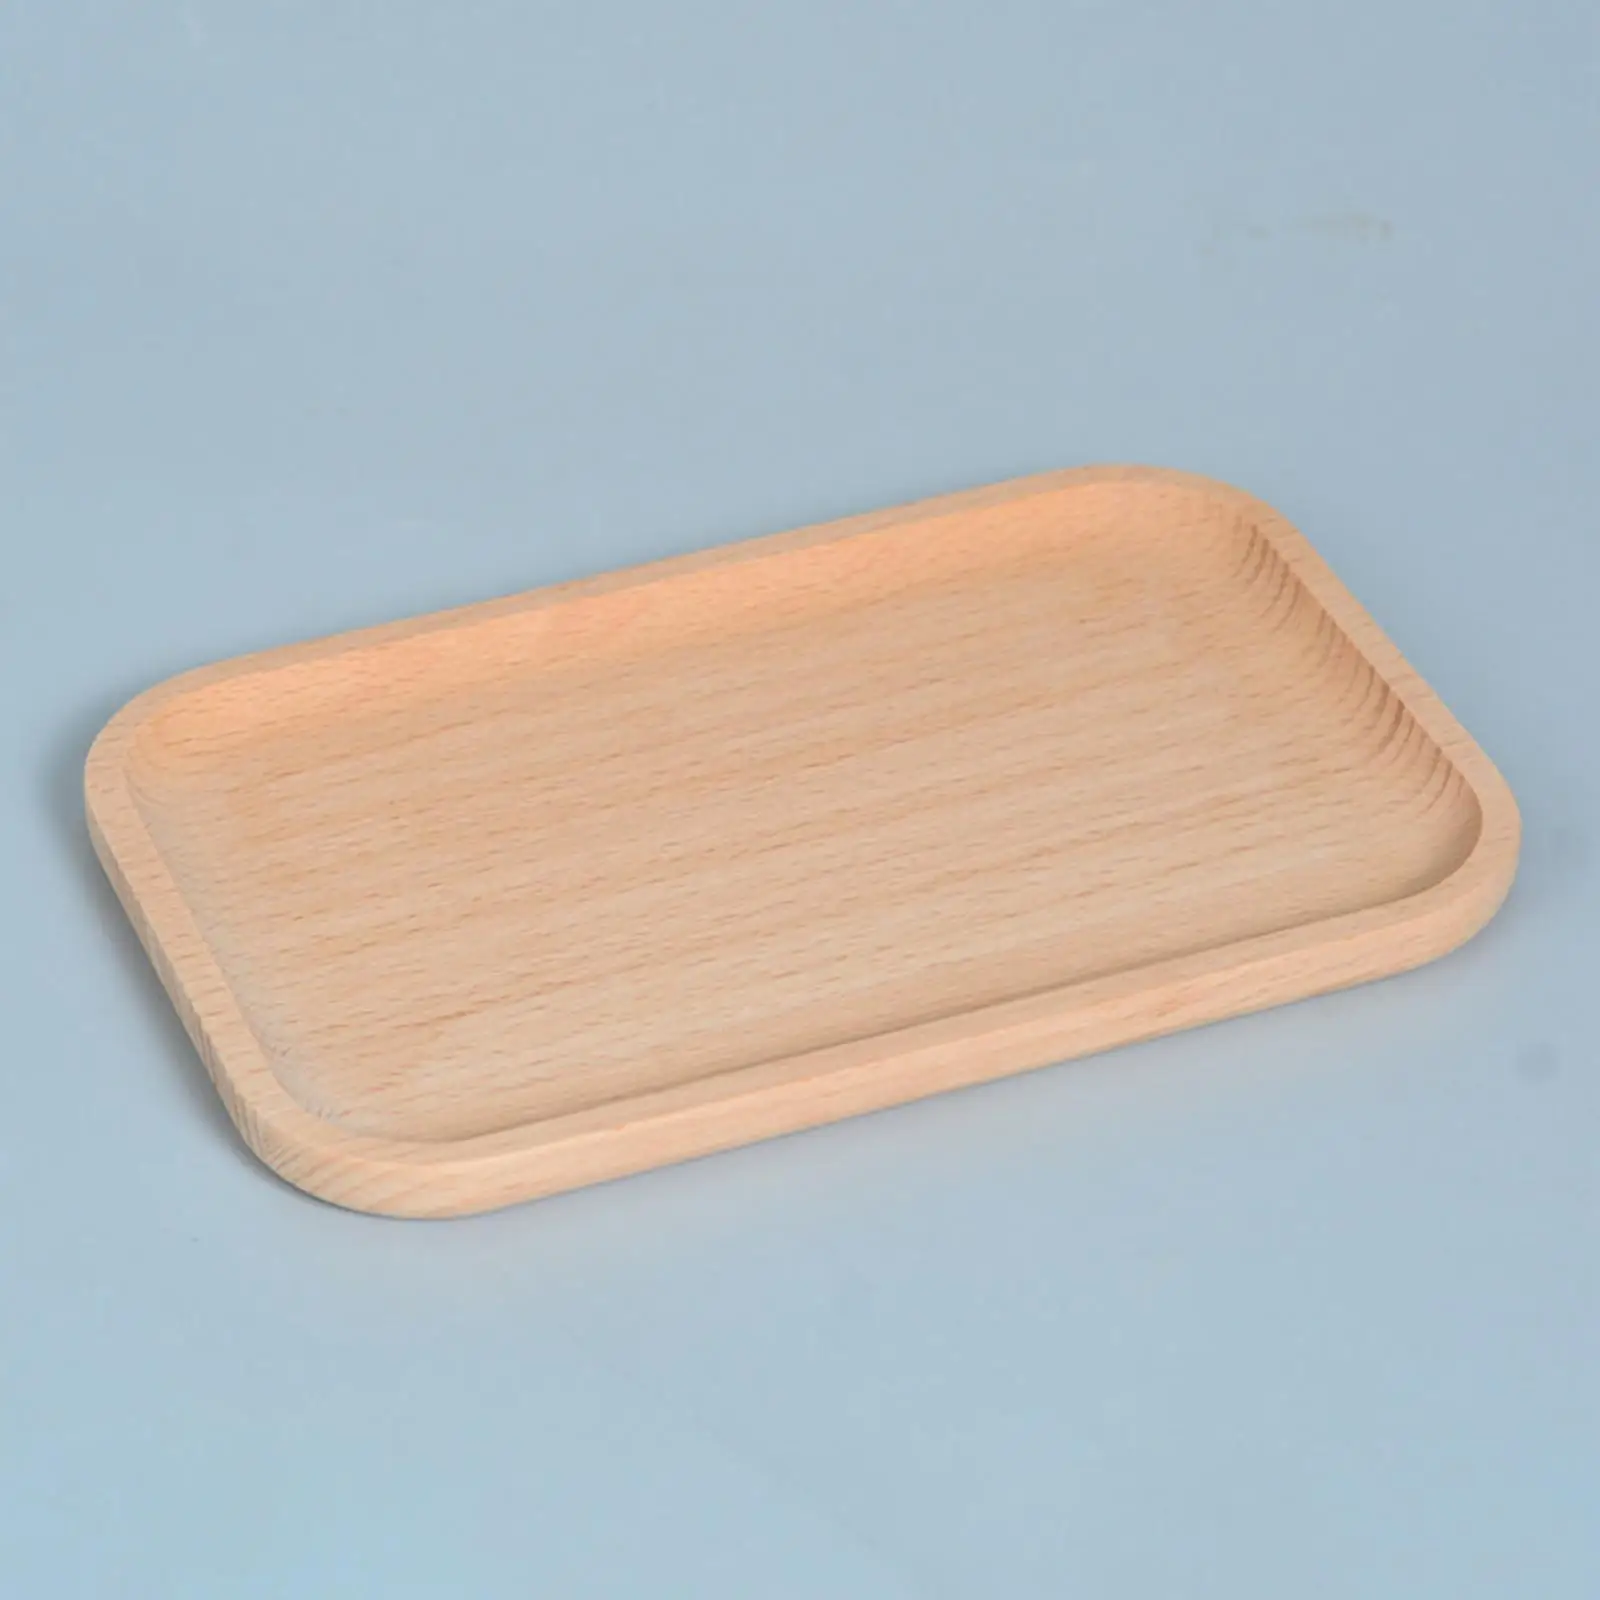 Wooden Serving Tray Household Vintage Food Tray for Party Breakfast Desktop